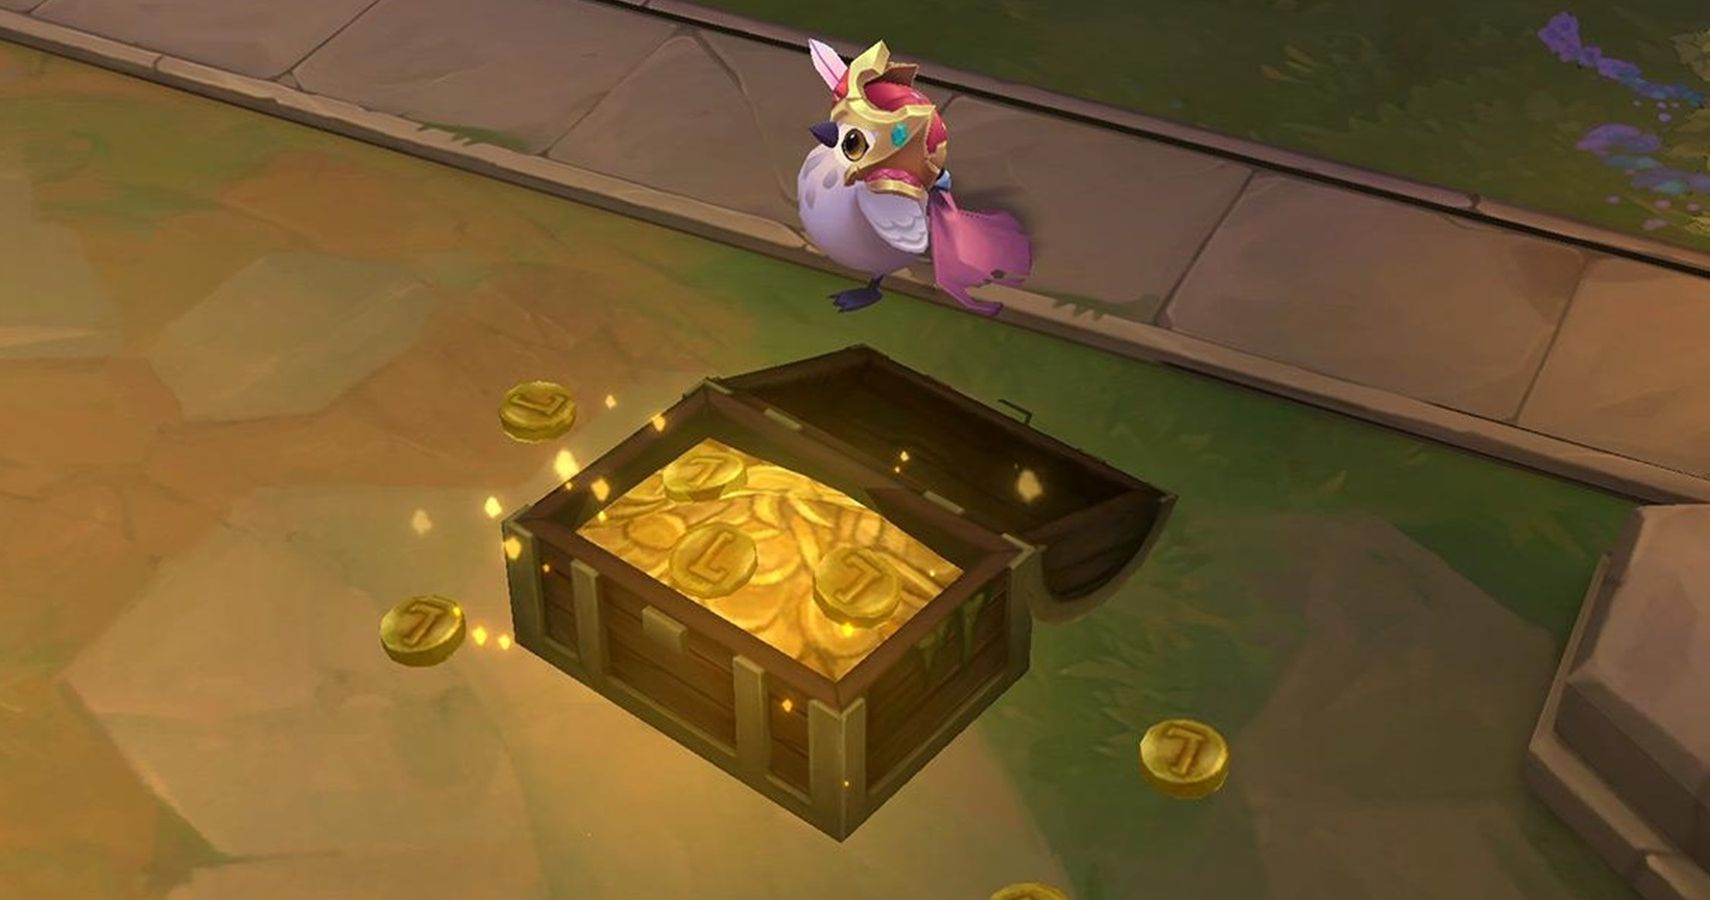 A bird character standing next to a chest of gold